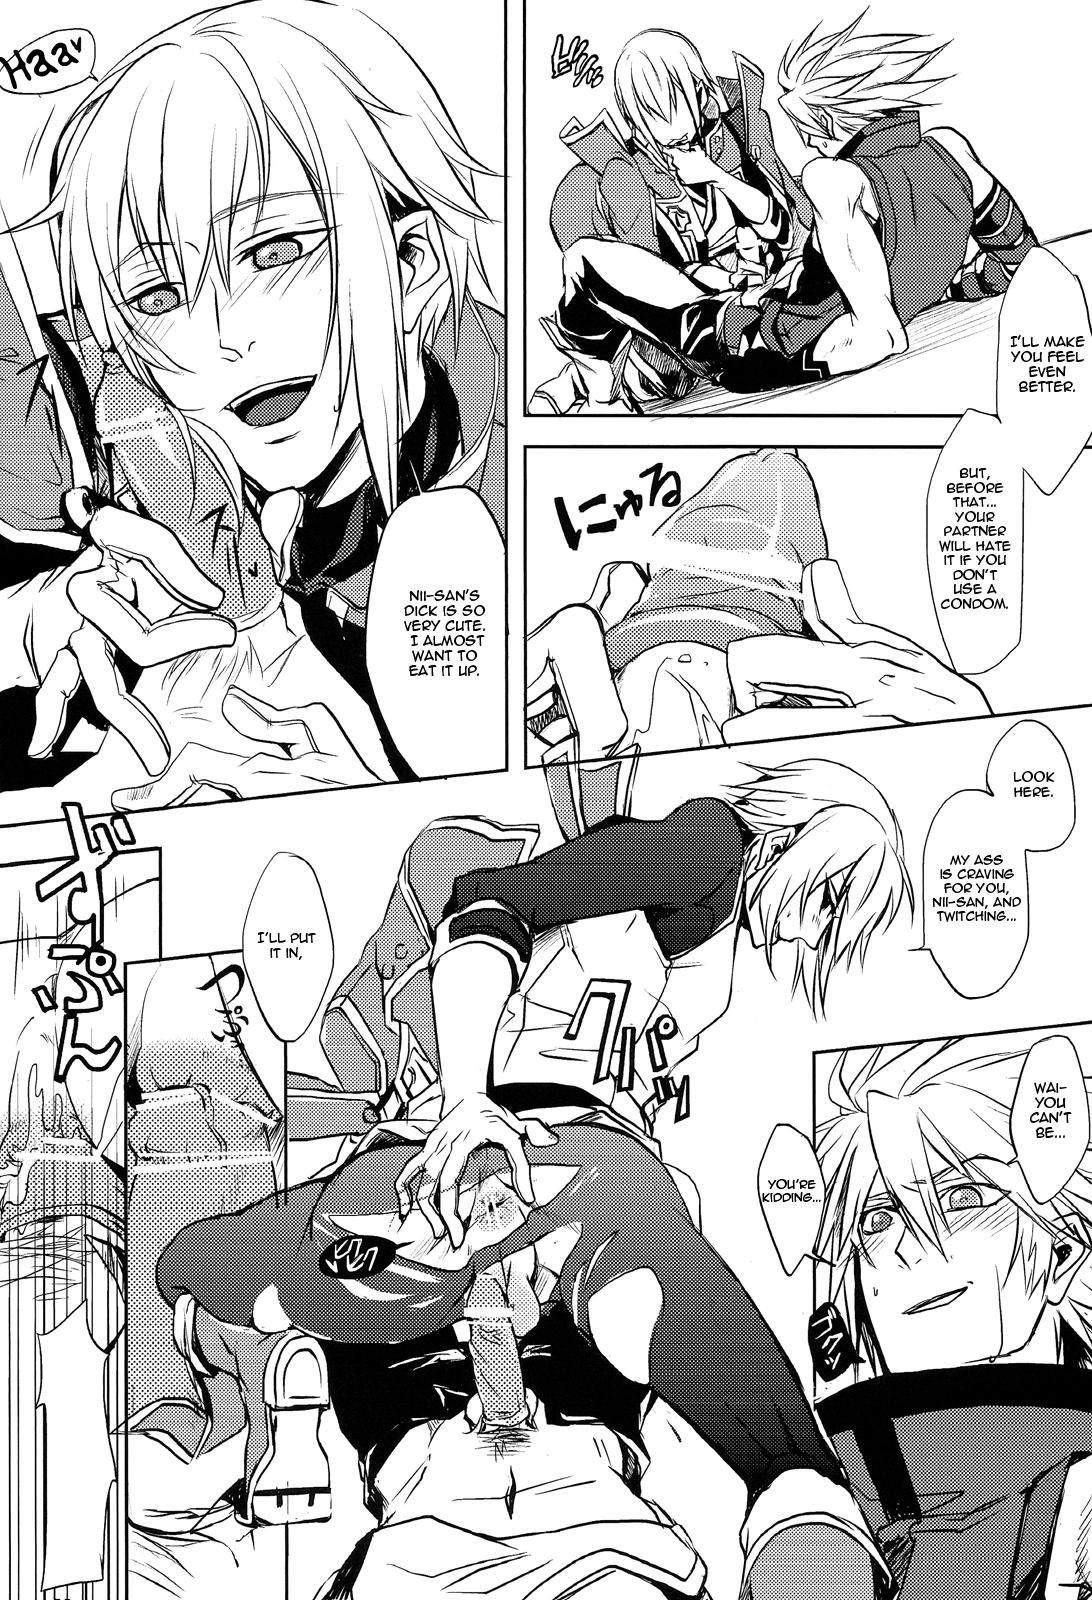 Face Fucking GRIOTTE - Blazblue Whore - Page 7